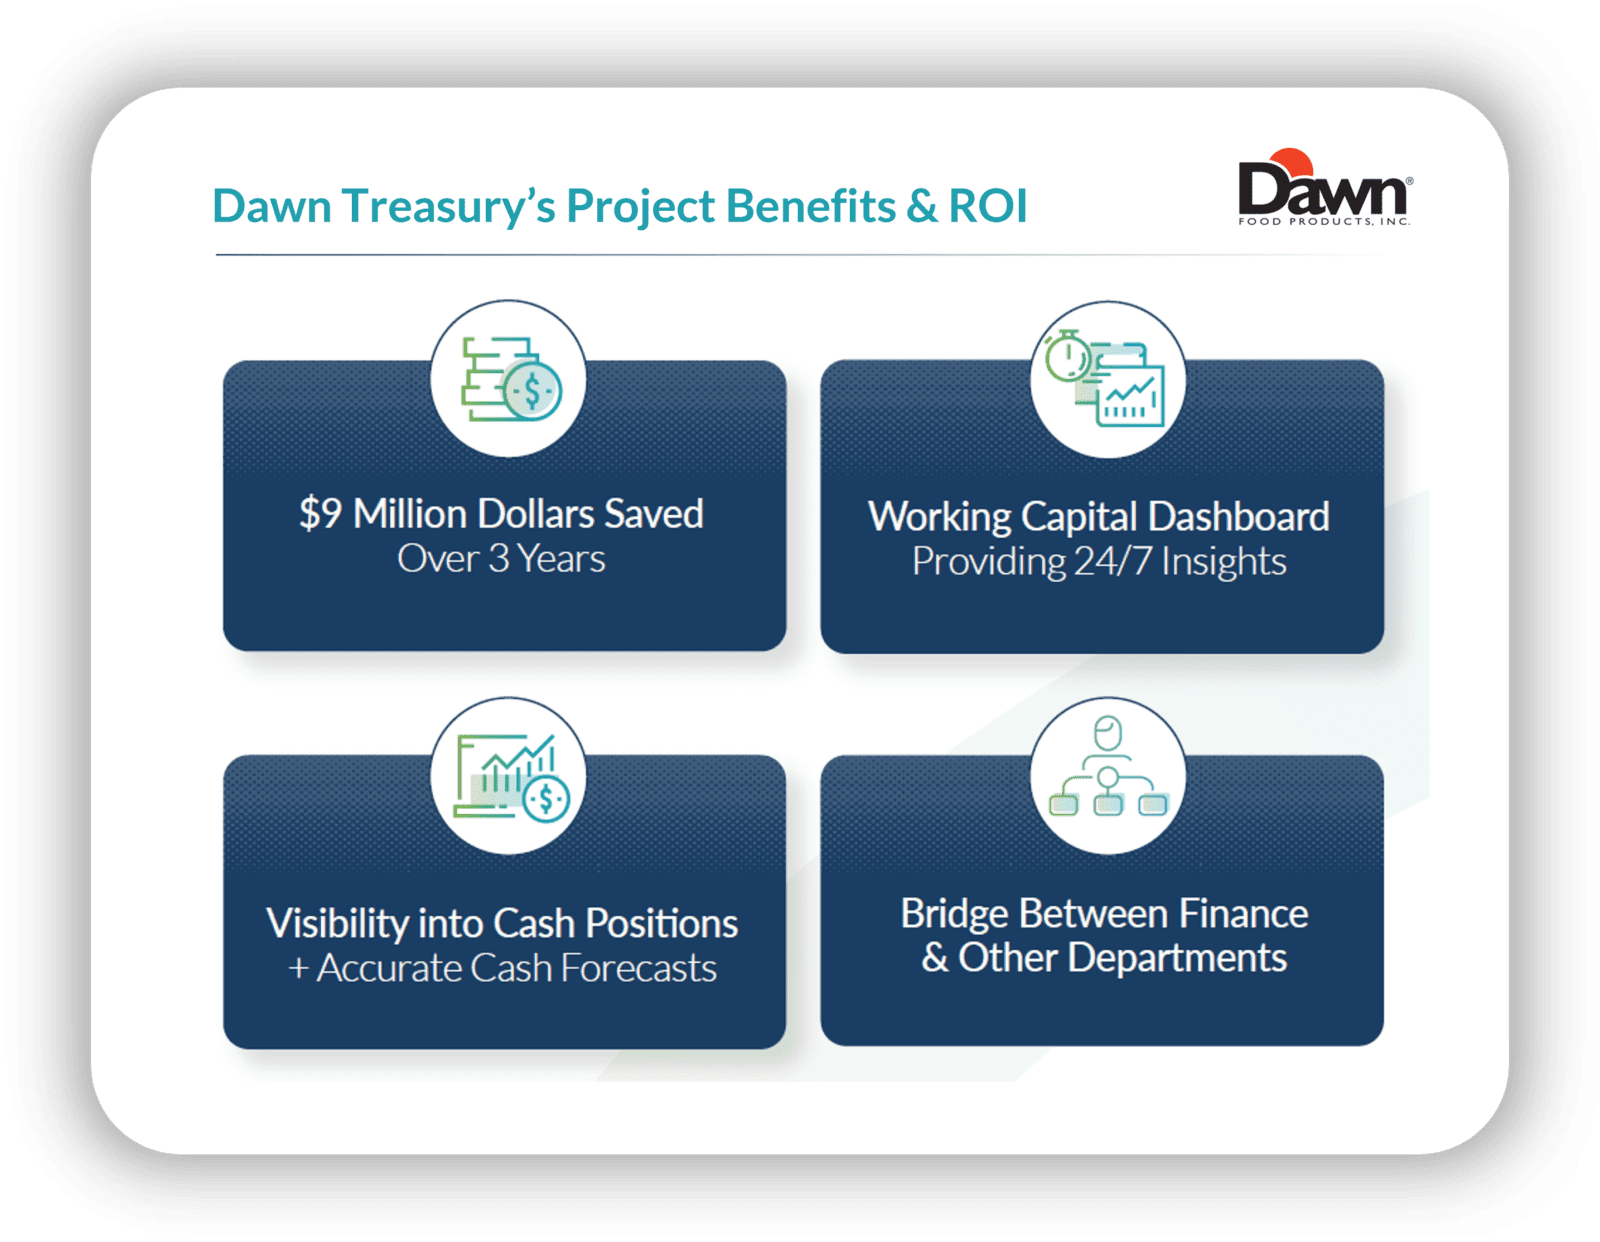 The primary benefits achieved by Dawn Foods treasury as a result of their cash forecasting and working capital project with TIS. 